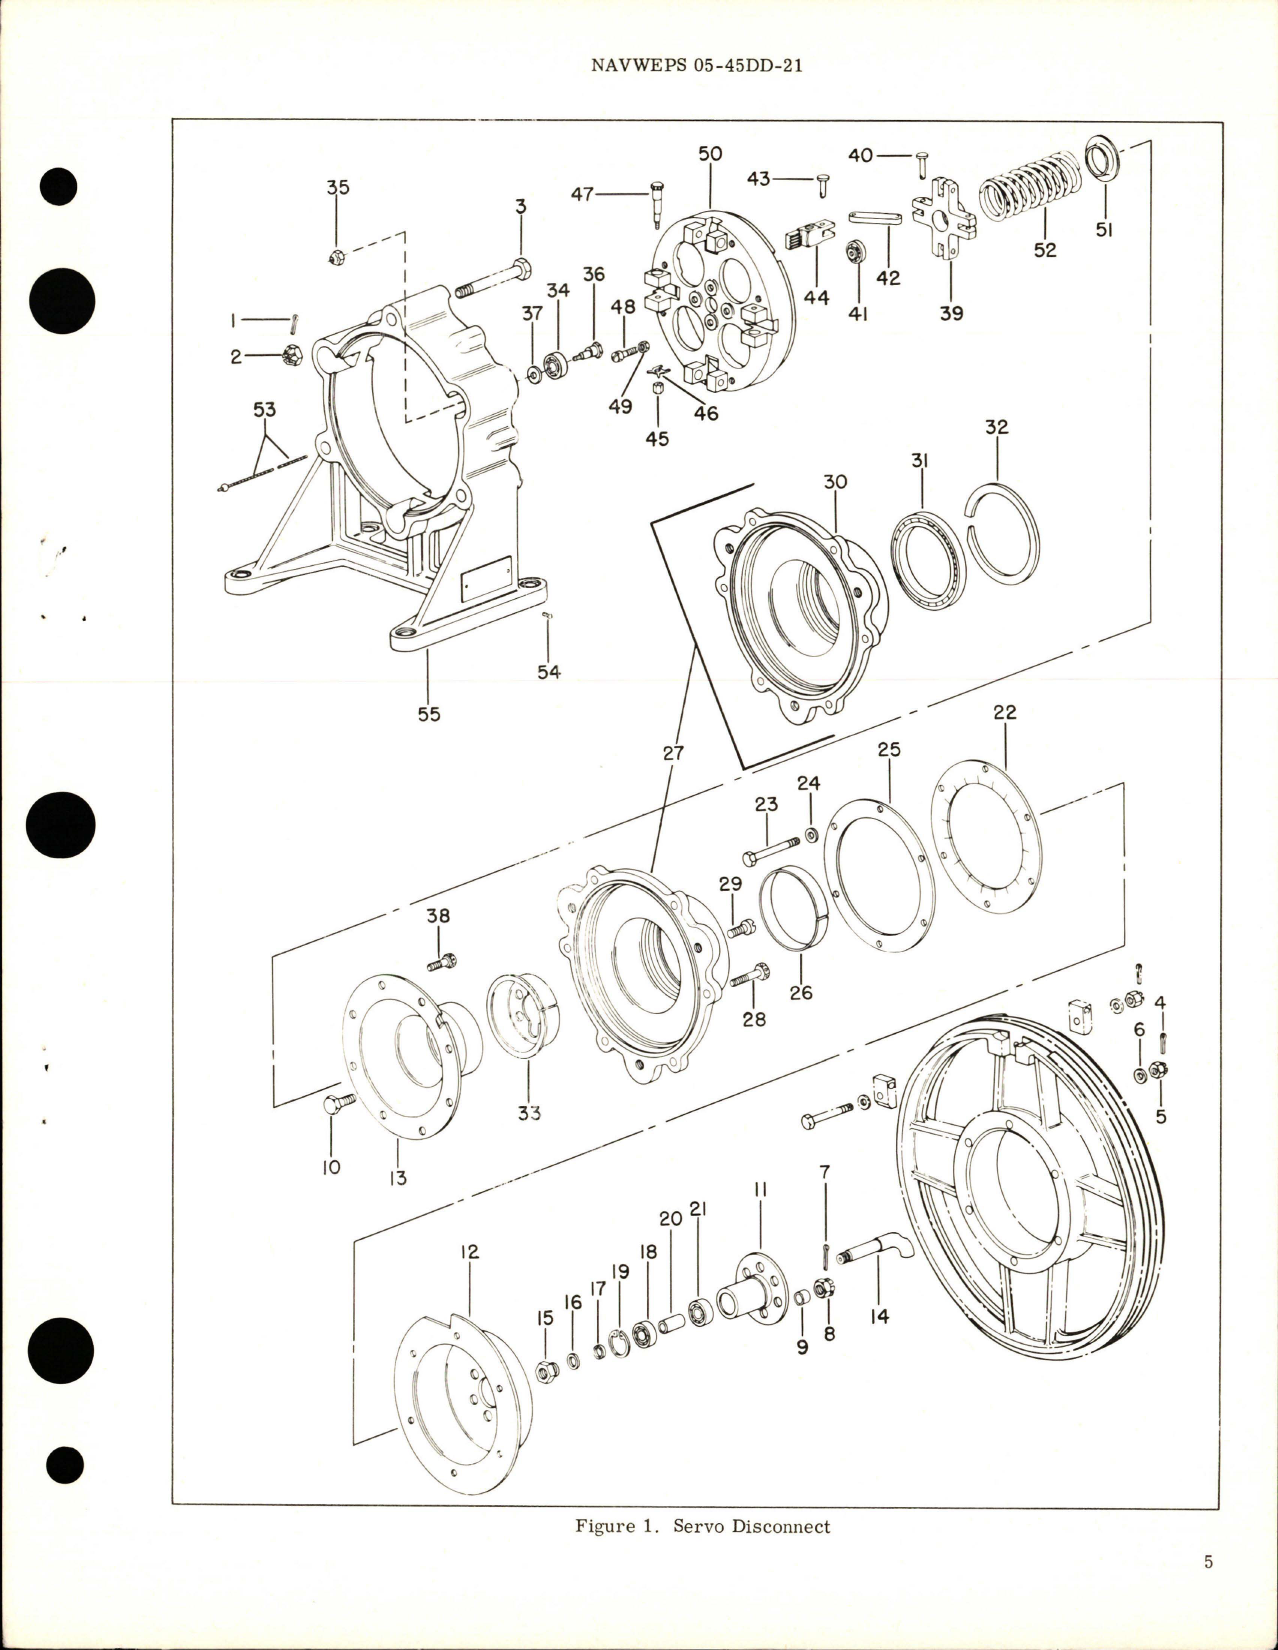 Sample page 5 from AirCorps Library document: Overhaul Instructions with Parts for Servo Disconnect - Type DQ-24-A2